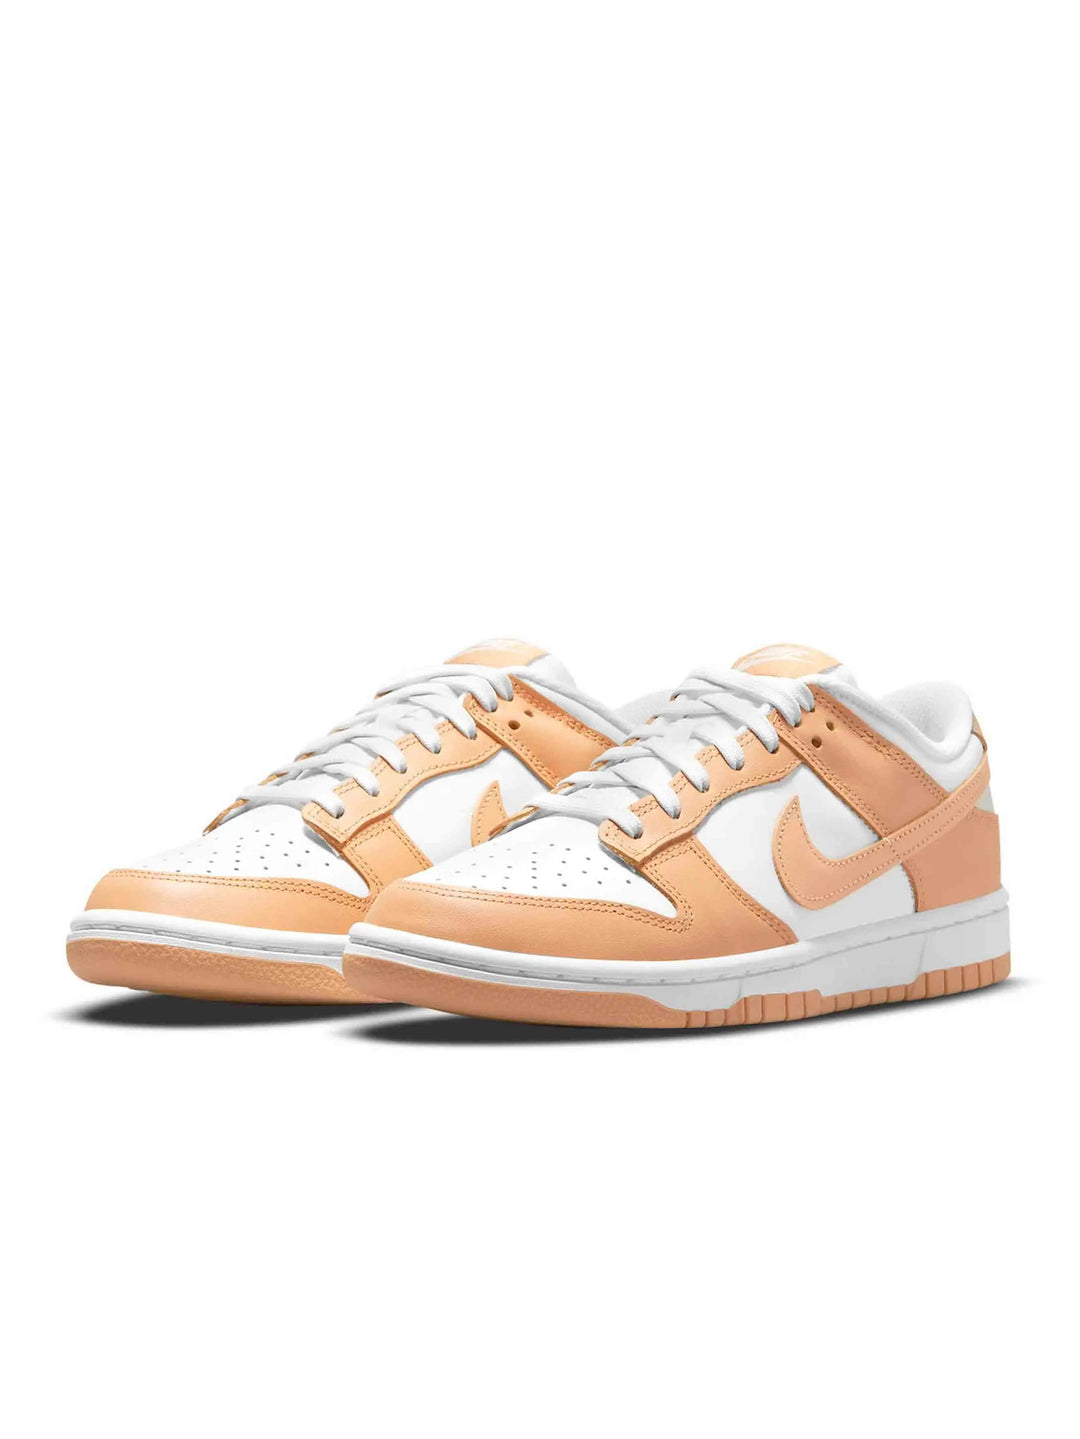 Nike Dunk Low Harvest Moon (W) Prior